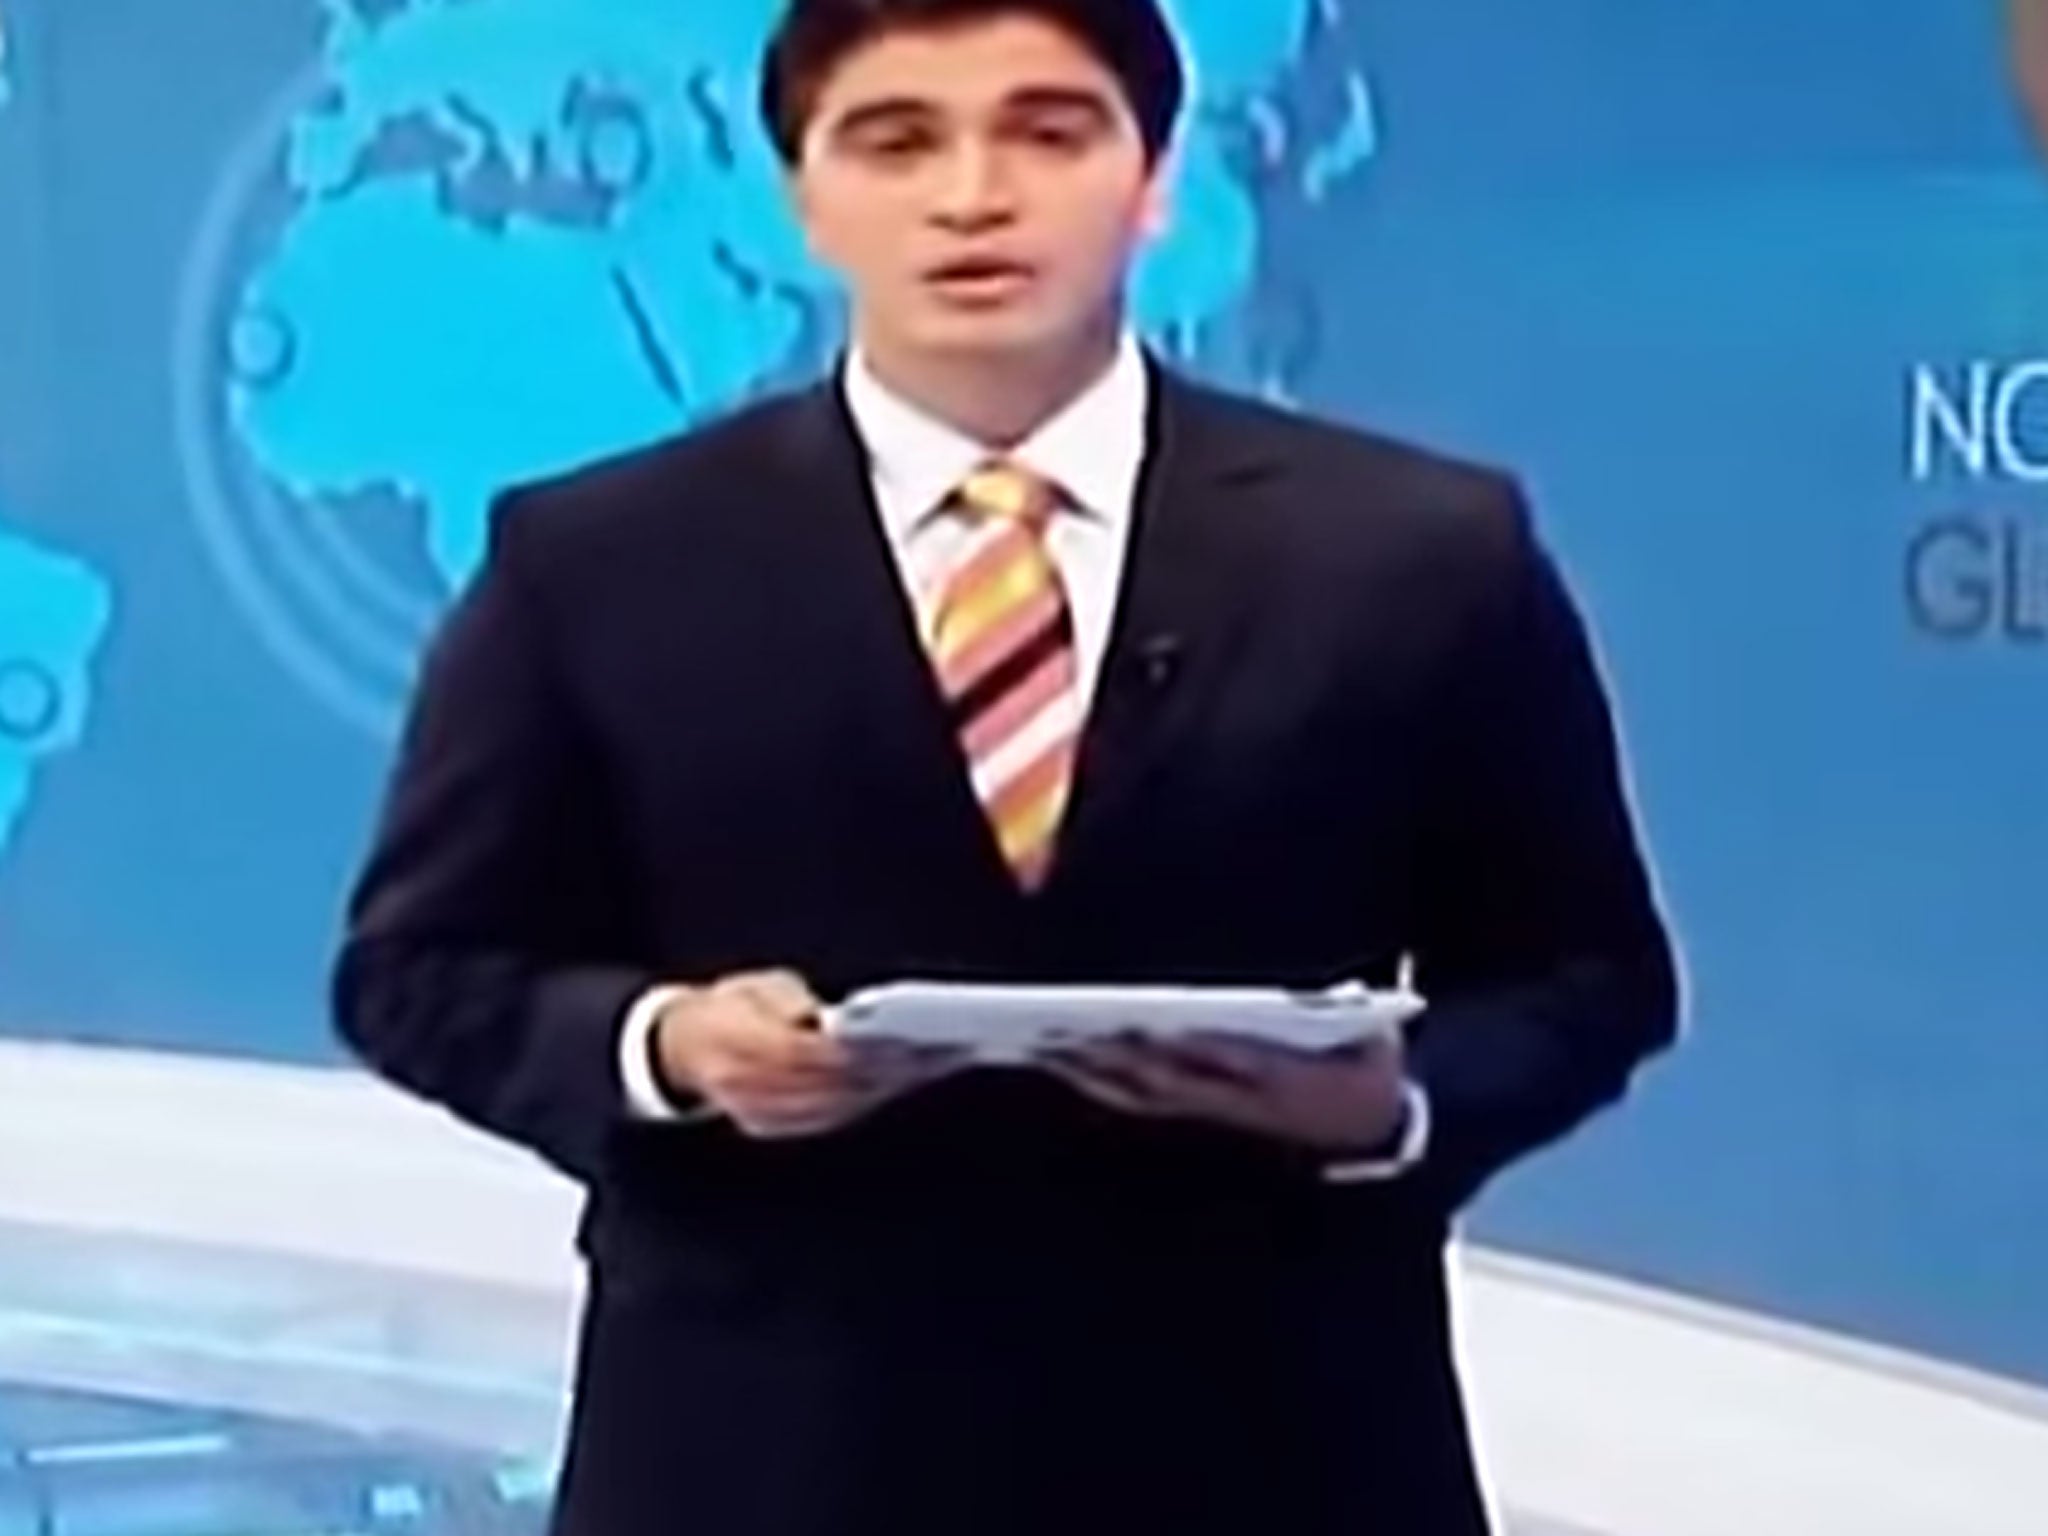 A still from the moment news presenter Rudy Chavez quit live on air